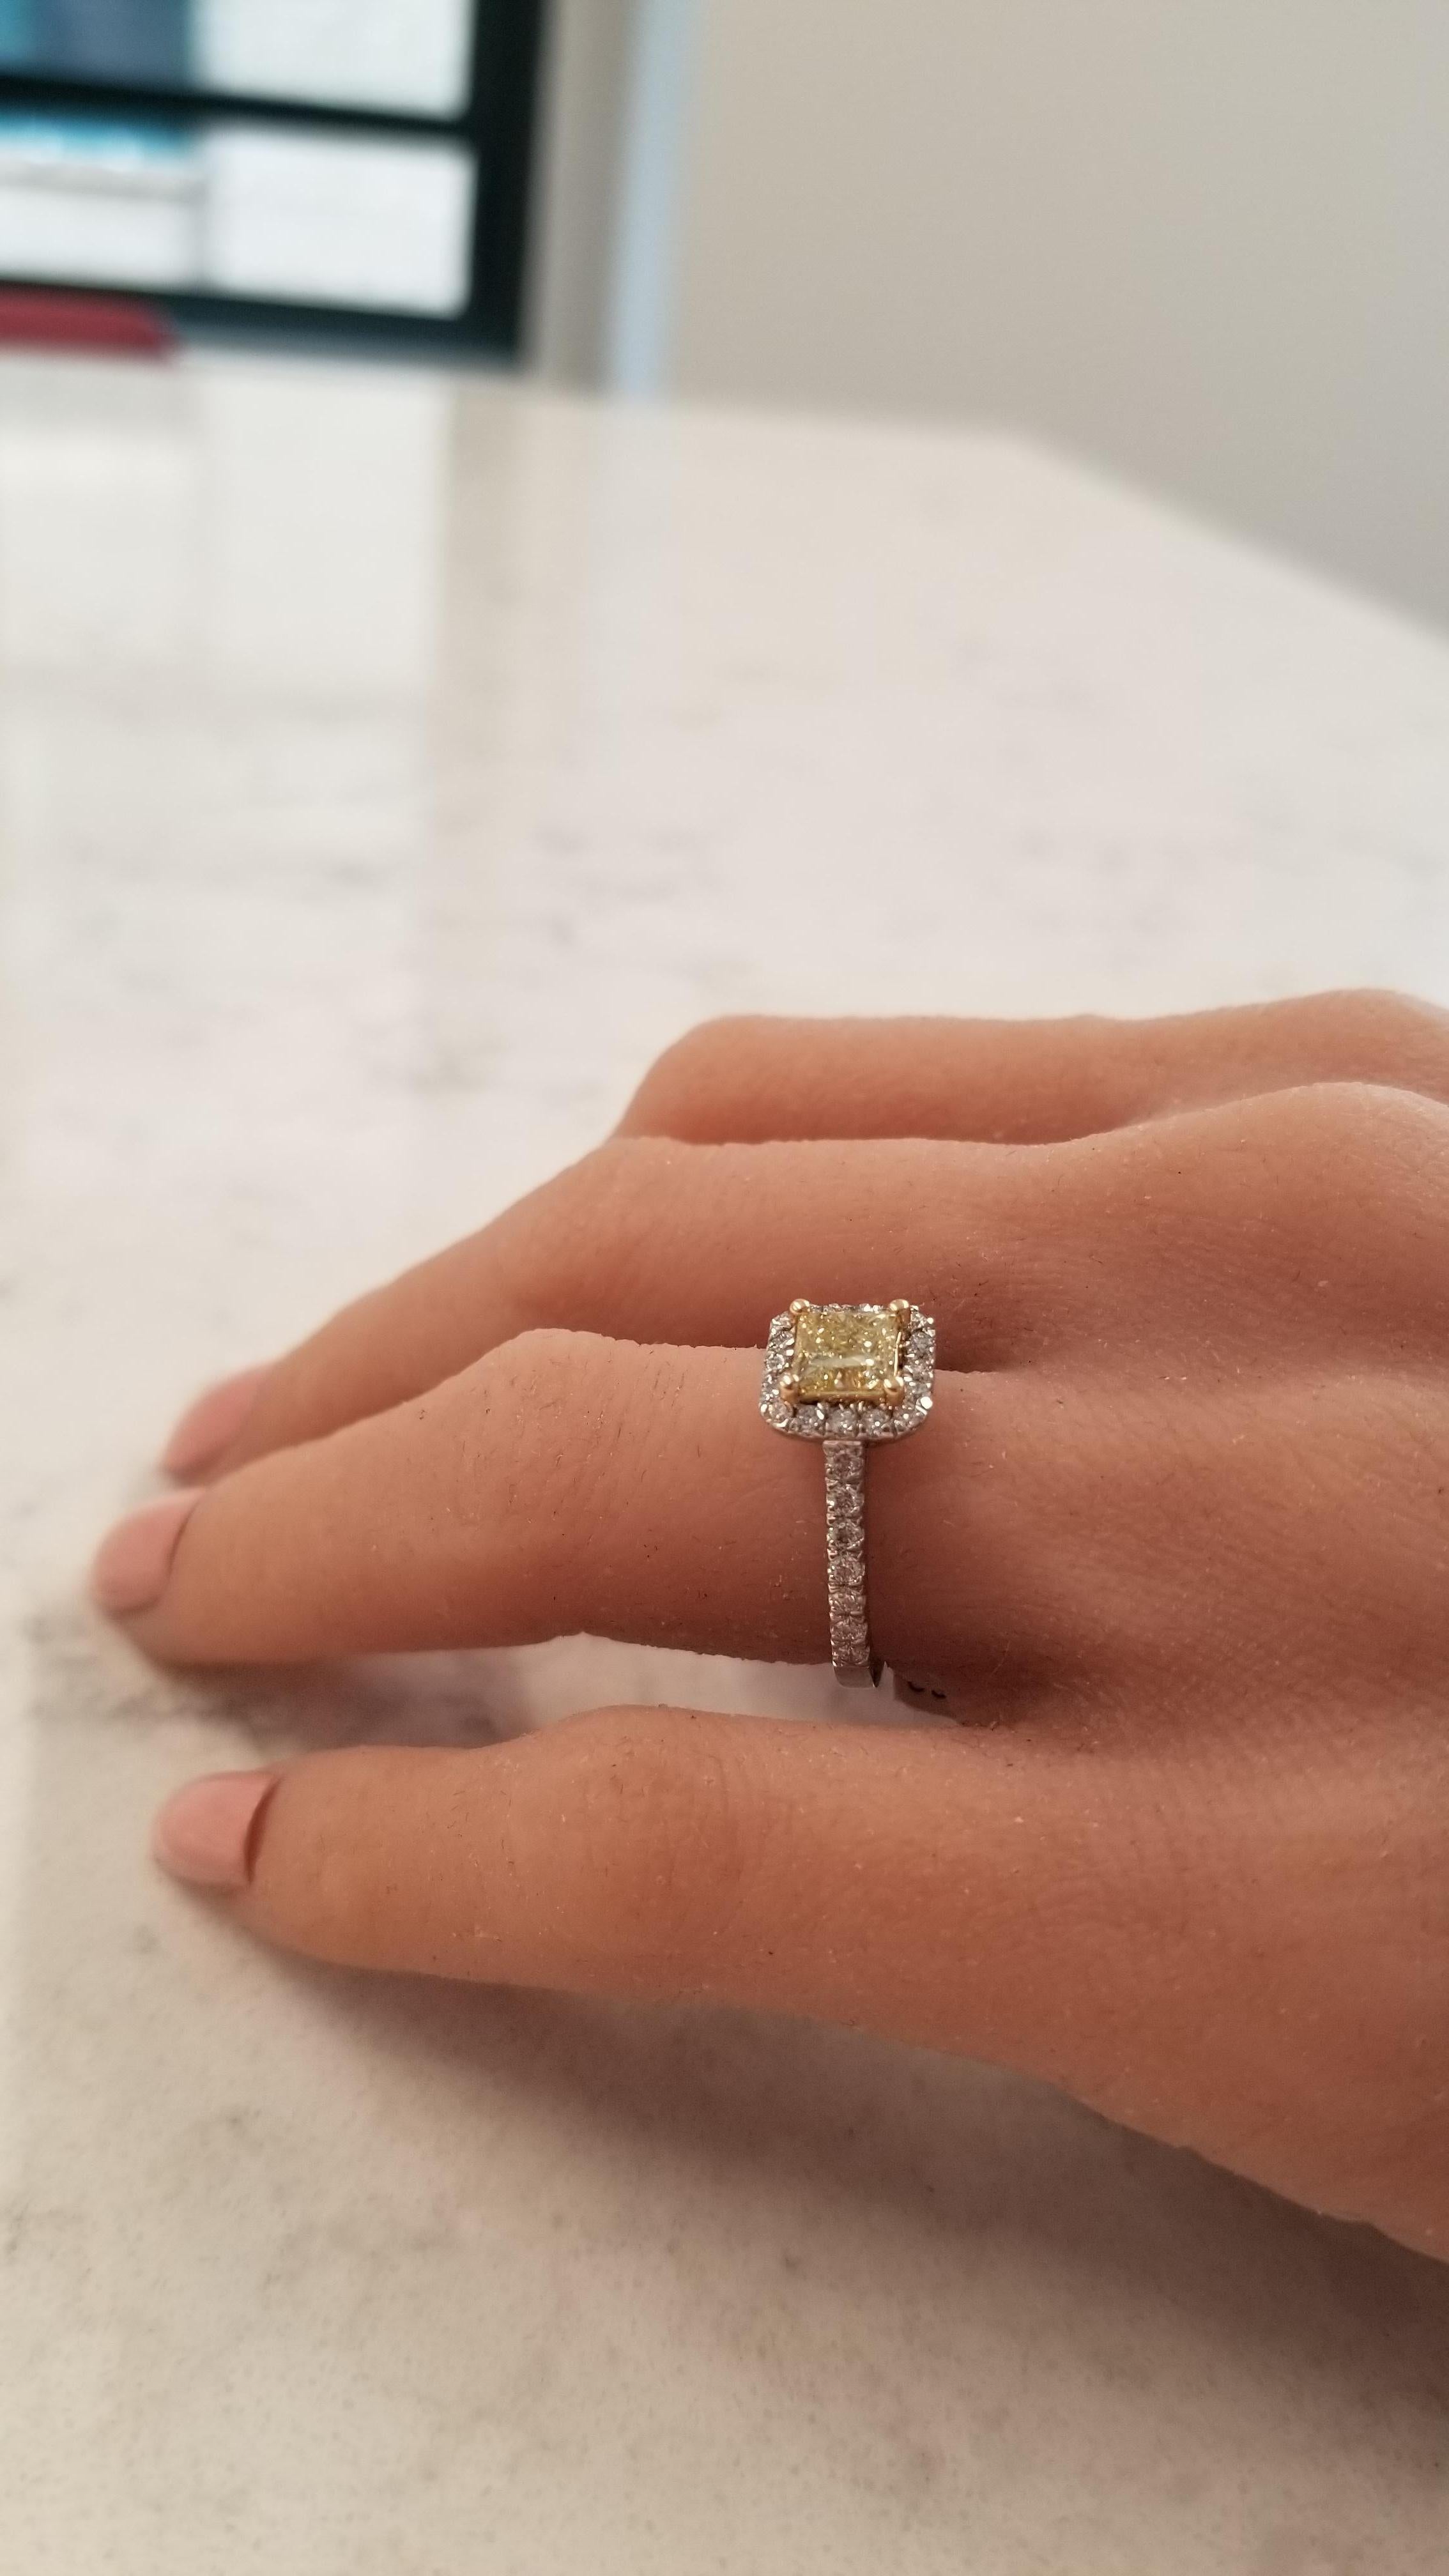 This is a GIA certified 1.06 carat princess cut, natural fancy yellow diamond measuring 5.34x5.30x4.14mm. This natural yellow diamond is framed by scintillating round brilliant cut white diamonds prong set in a halo cluster and down the sides of the